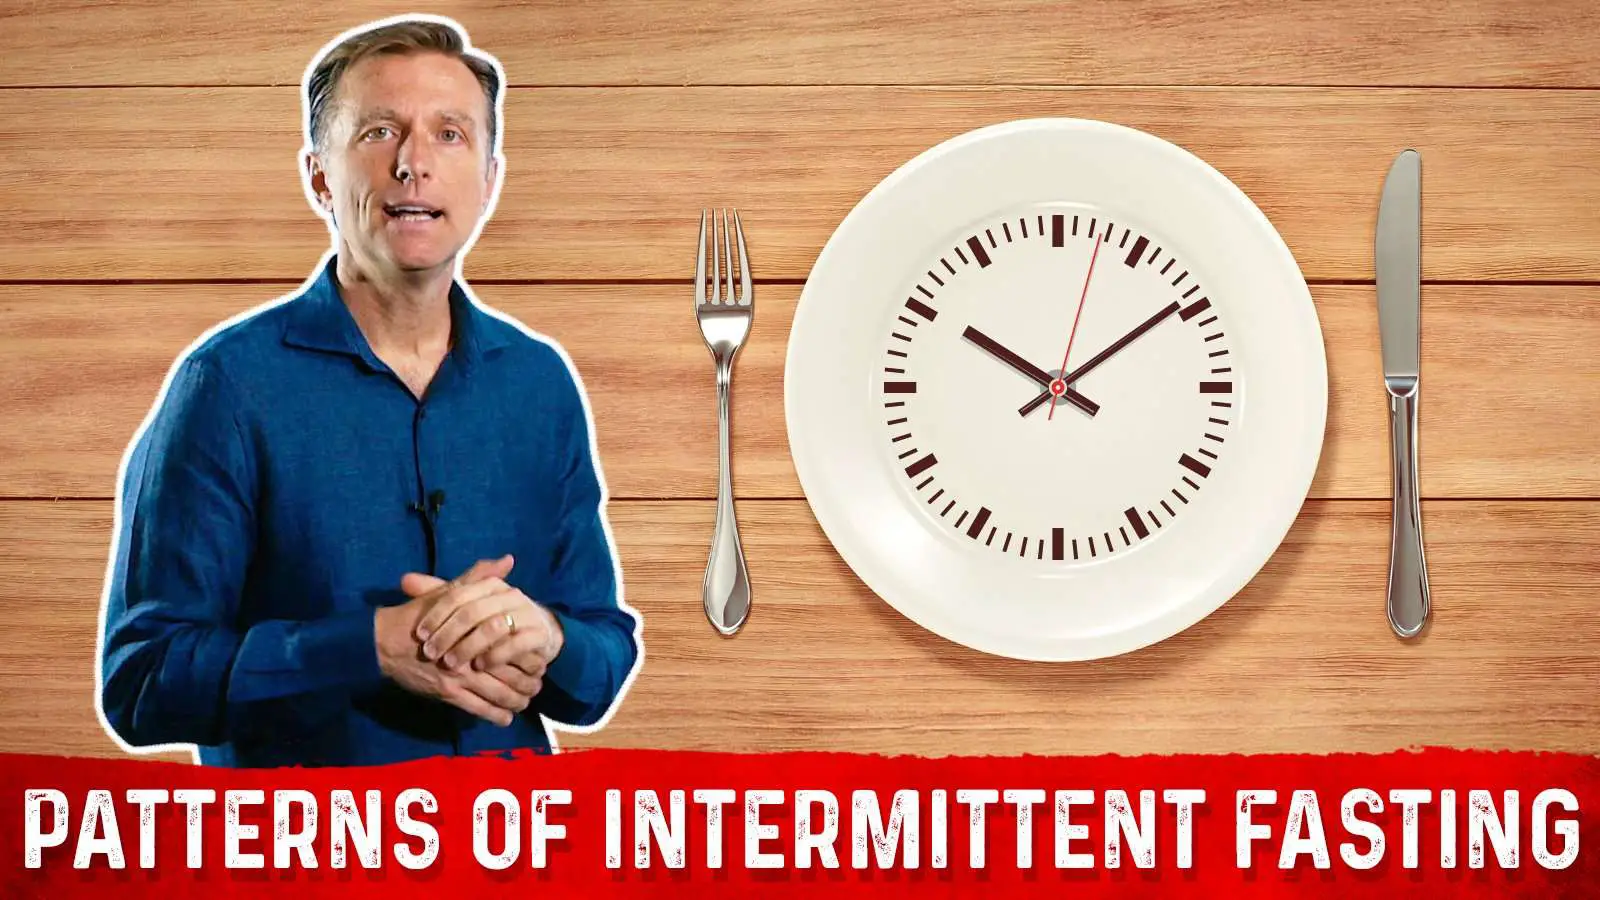 How Often Should You Do Intermittent Fasting